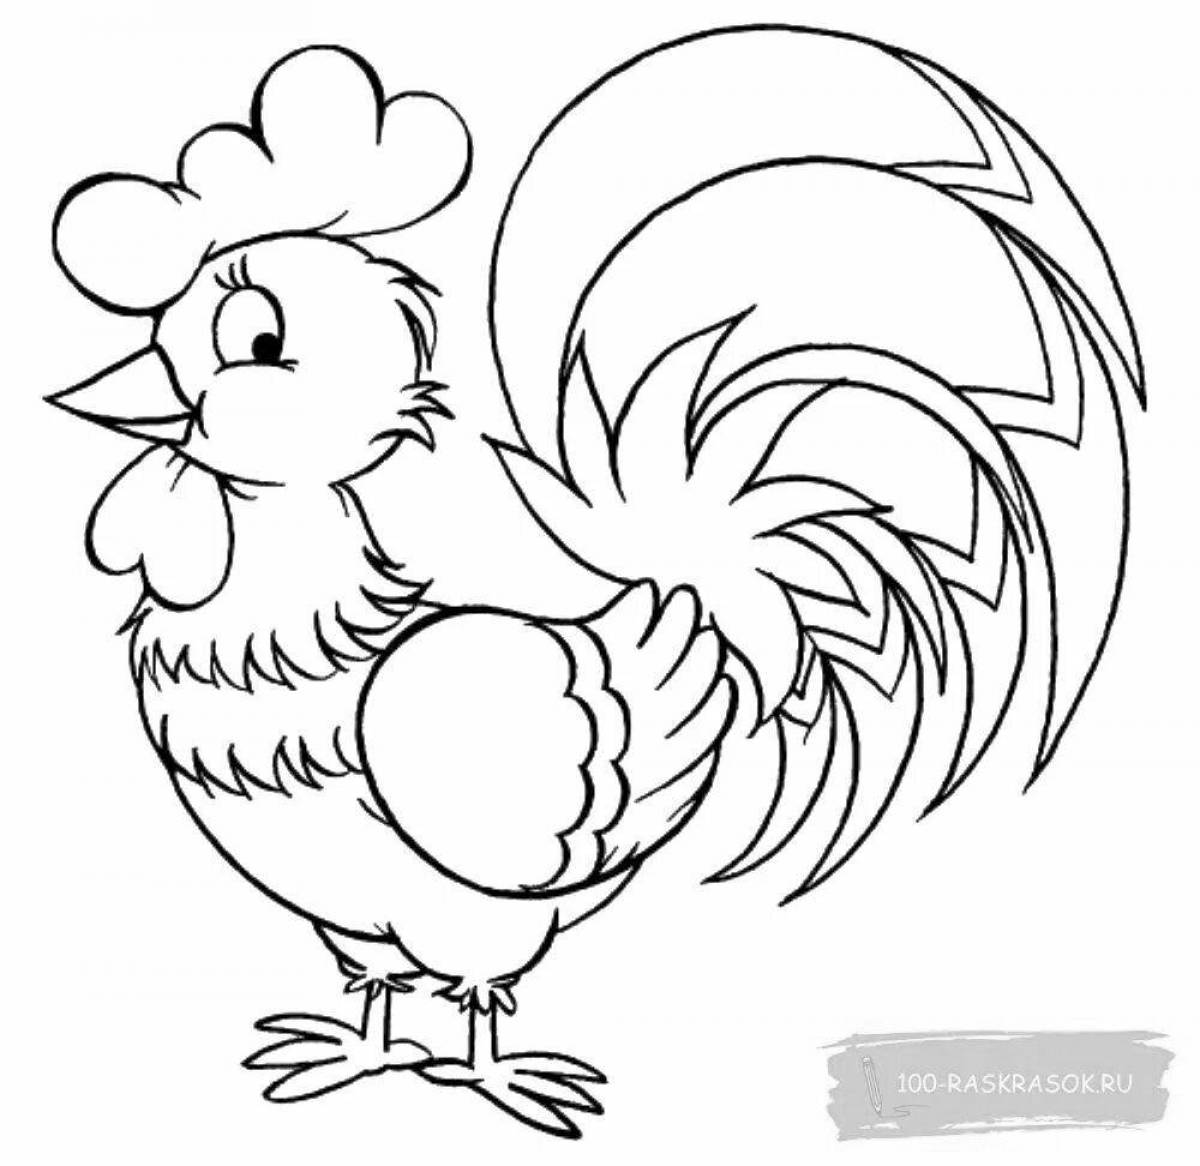 Colorful cockerel drawing for kids